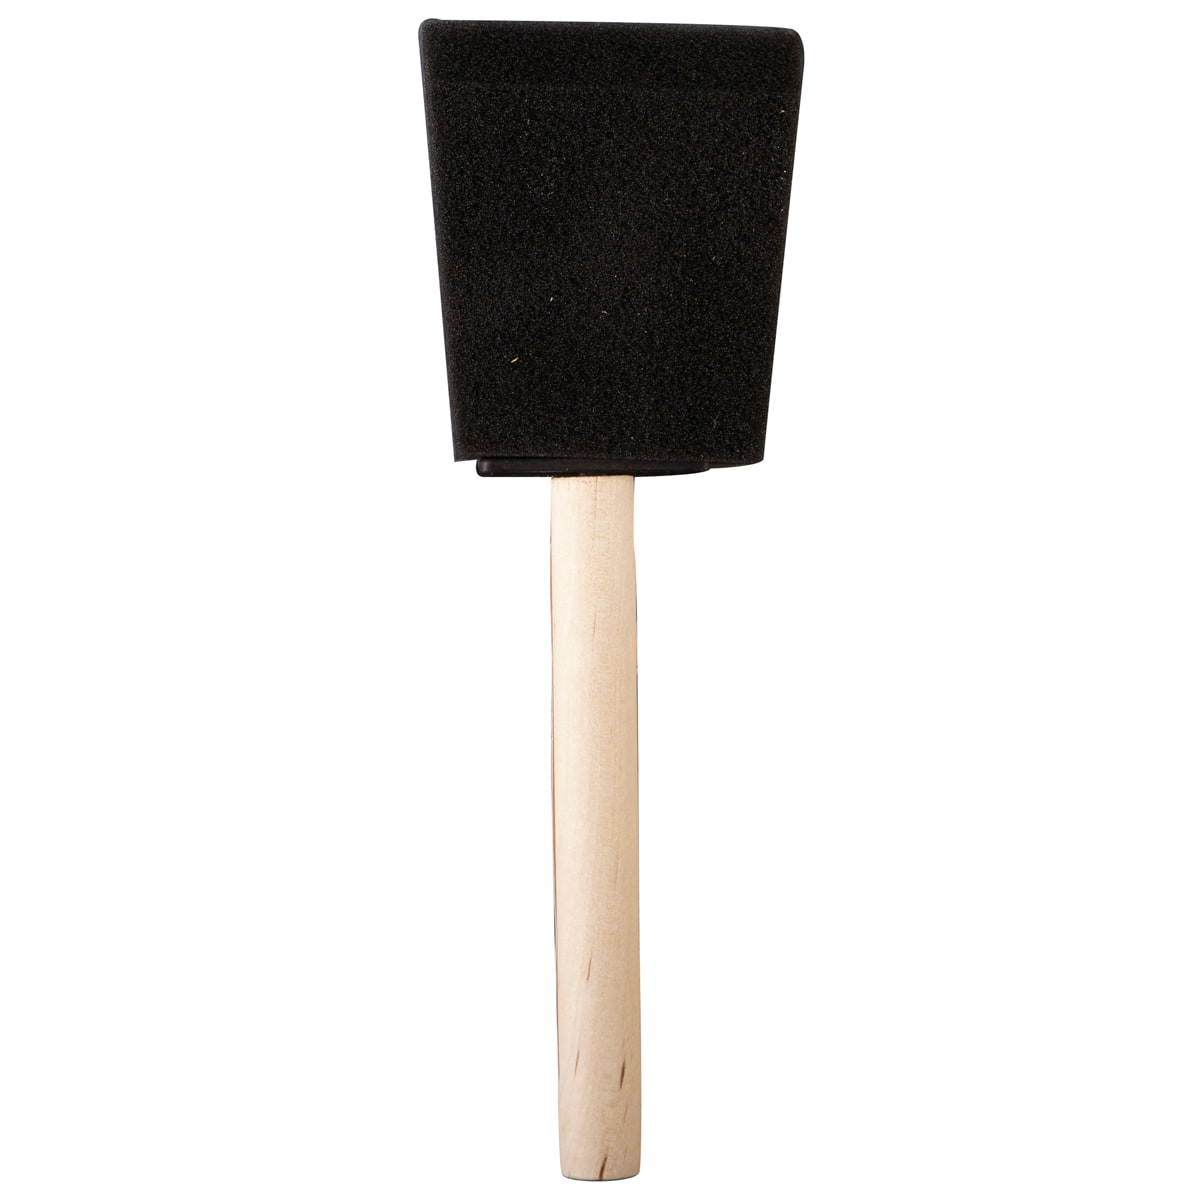 Black Foam Brush, Foam Brush Light Weight Long Time Use Easy to Hold with Beveled Sponge Tip for Paint Pigments and Other Media